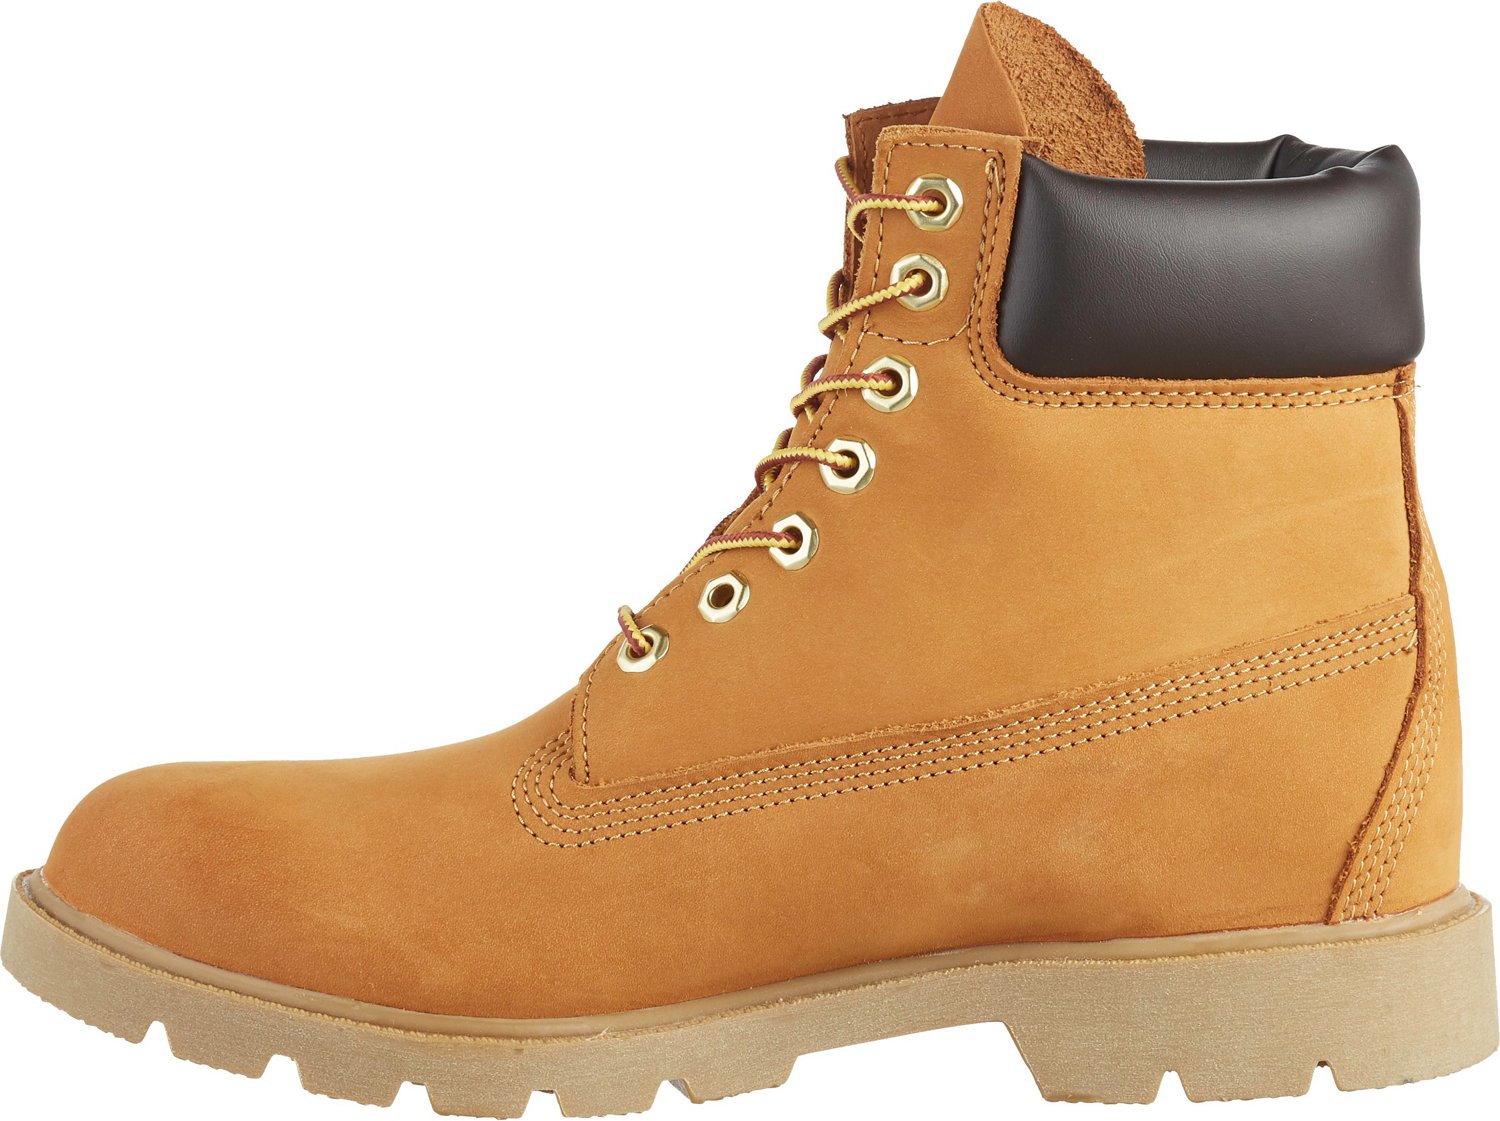 Timberland Men's Classic 6 inch Boots 